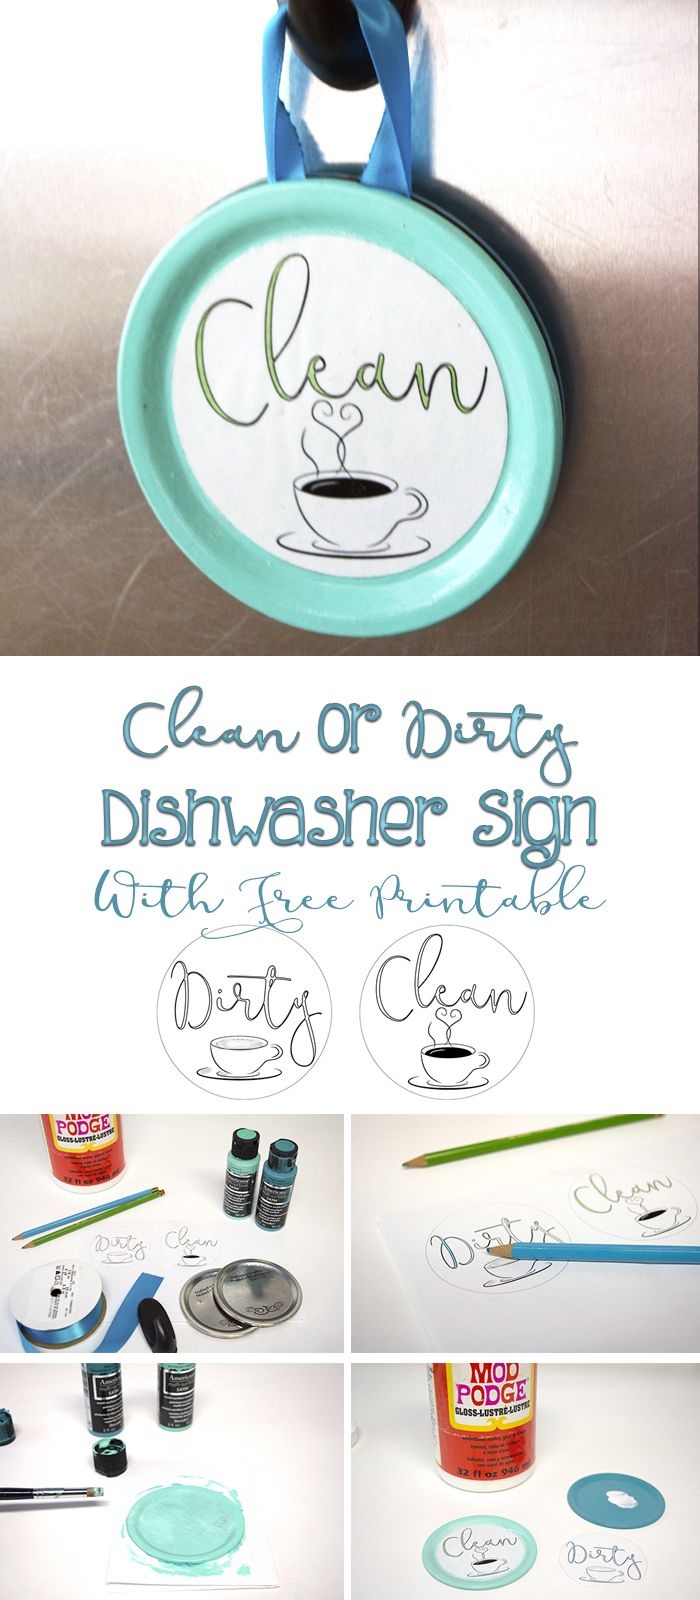 Easy Clean Or Dirty Dishwasher Sign With Free Printable | Diy From - Free Printable Clean Dirty Dishwasher Sign